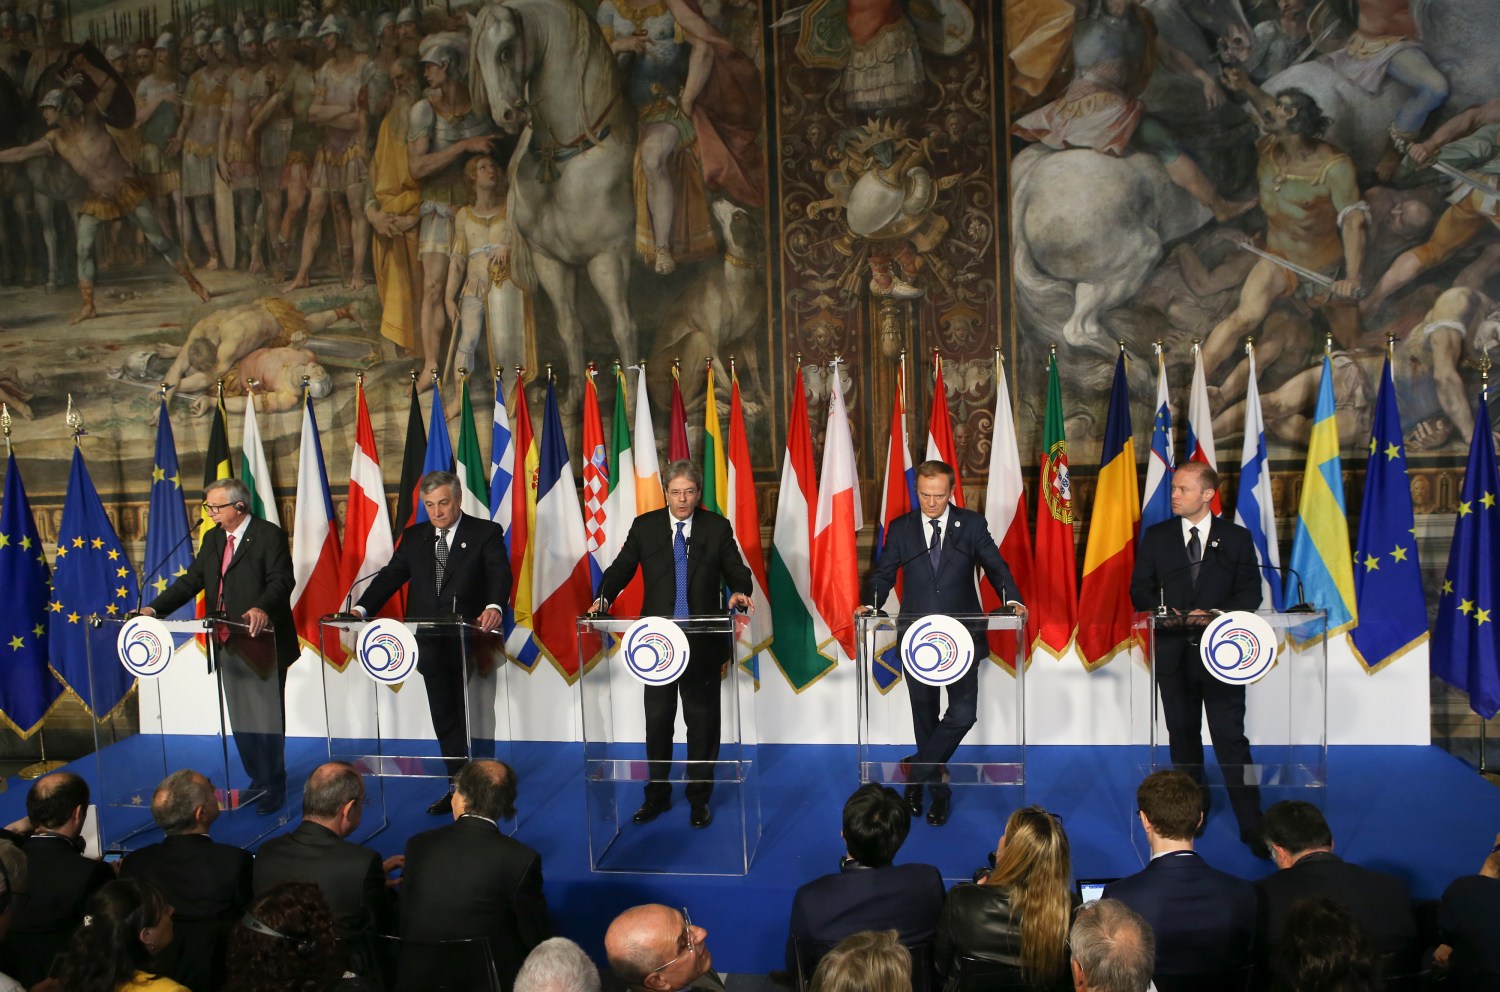 (L-R) European Commission President Jean-Claude Juncker, European Parliament President Antonio Tajani, Italy's Prime Minister Paolo Gentiloni, European Council President Donald Tusk and Malta's Prime Minister Joseph Muscat attedns a news conference at the end of the EU leaders meeting on the 60th anniversary of the Treaty of Rome, in Rome, Italy March 25, 2017. REUTERS/Remo Casilli - RTX32OA0